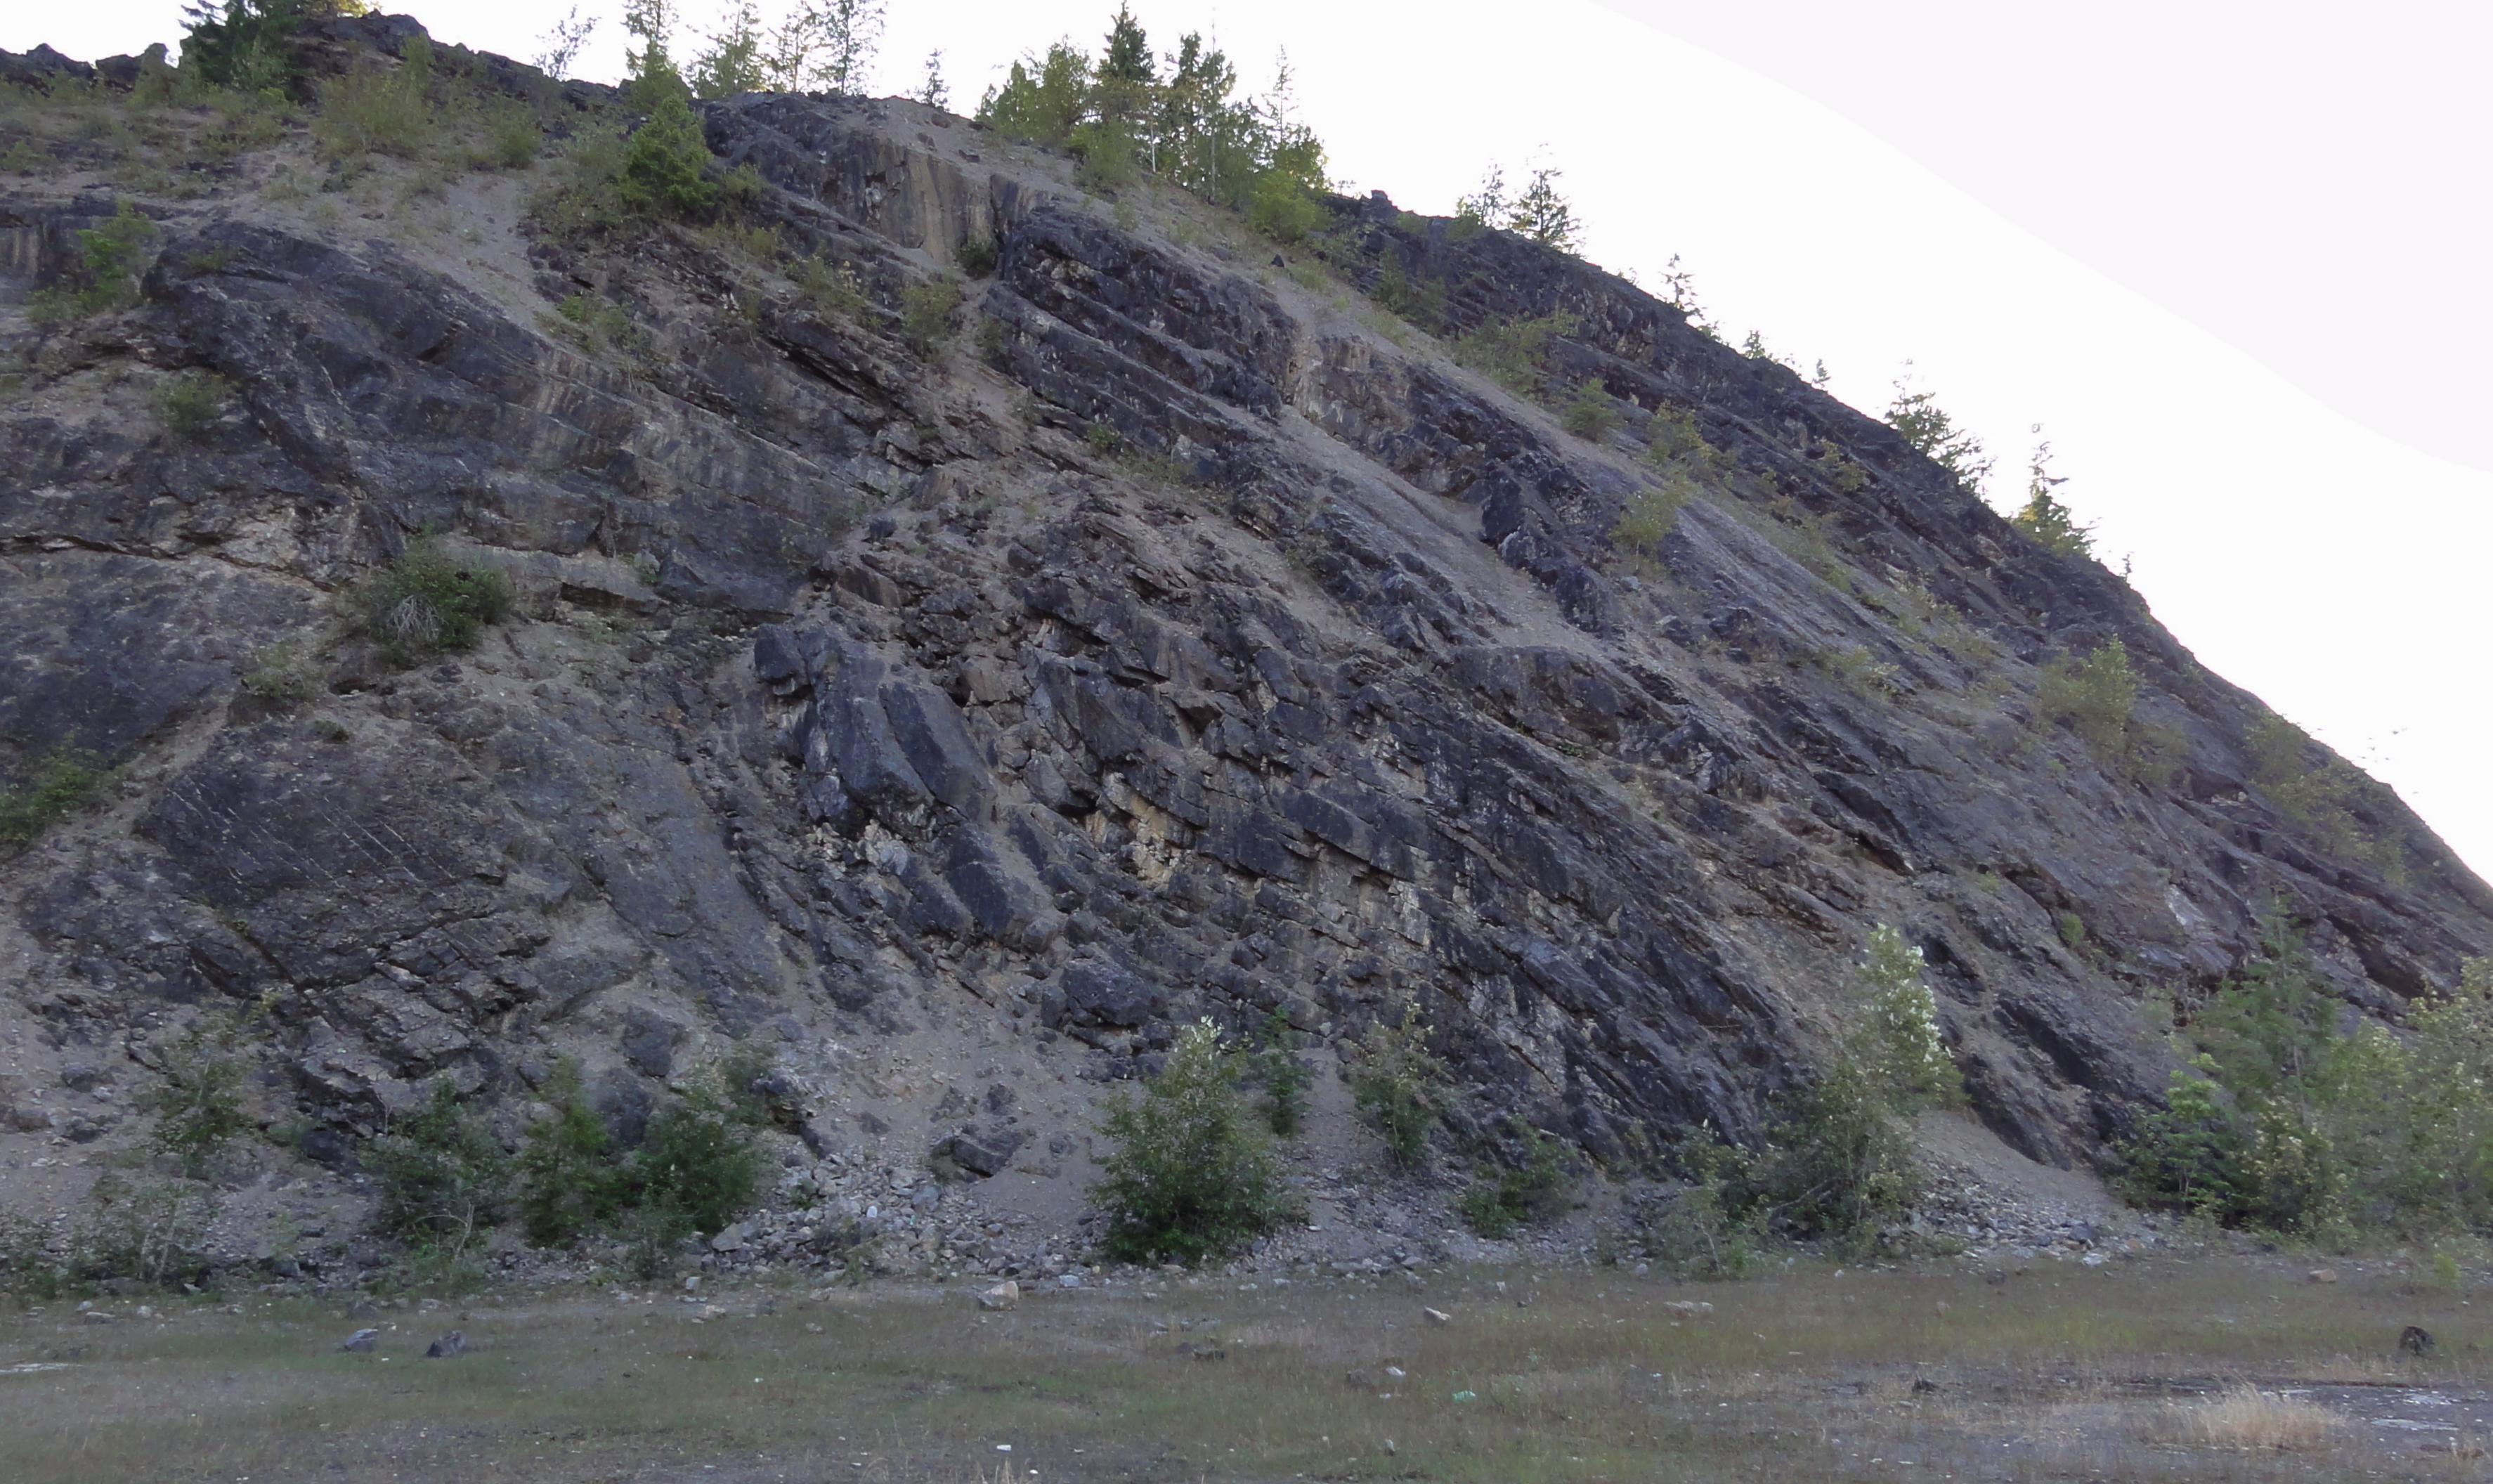 Folds in limestone, quarry in Concrete, WA. Quarry wall is roughly 100 feet (30 meters) high.